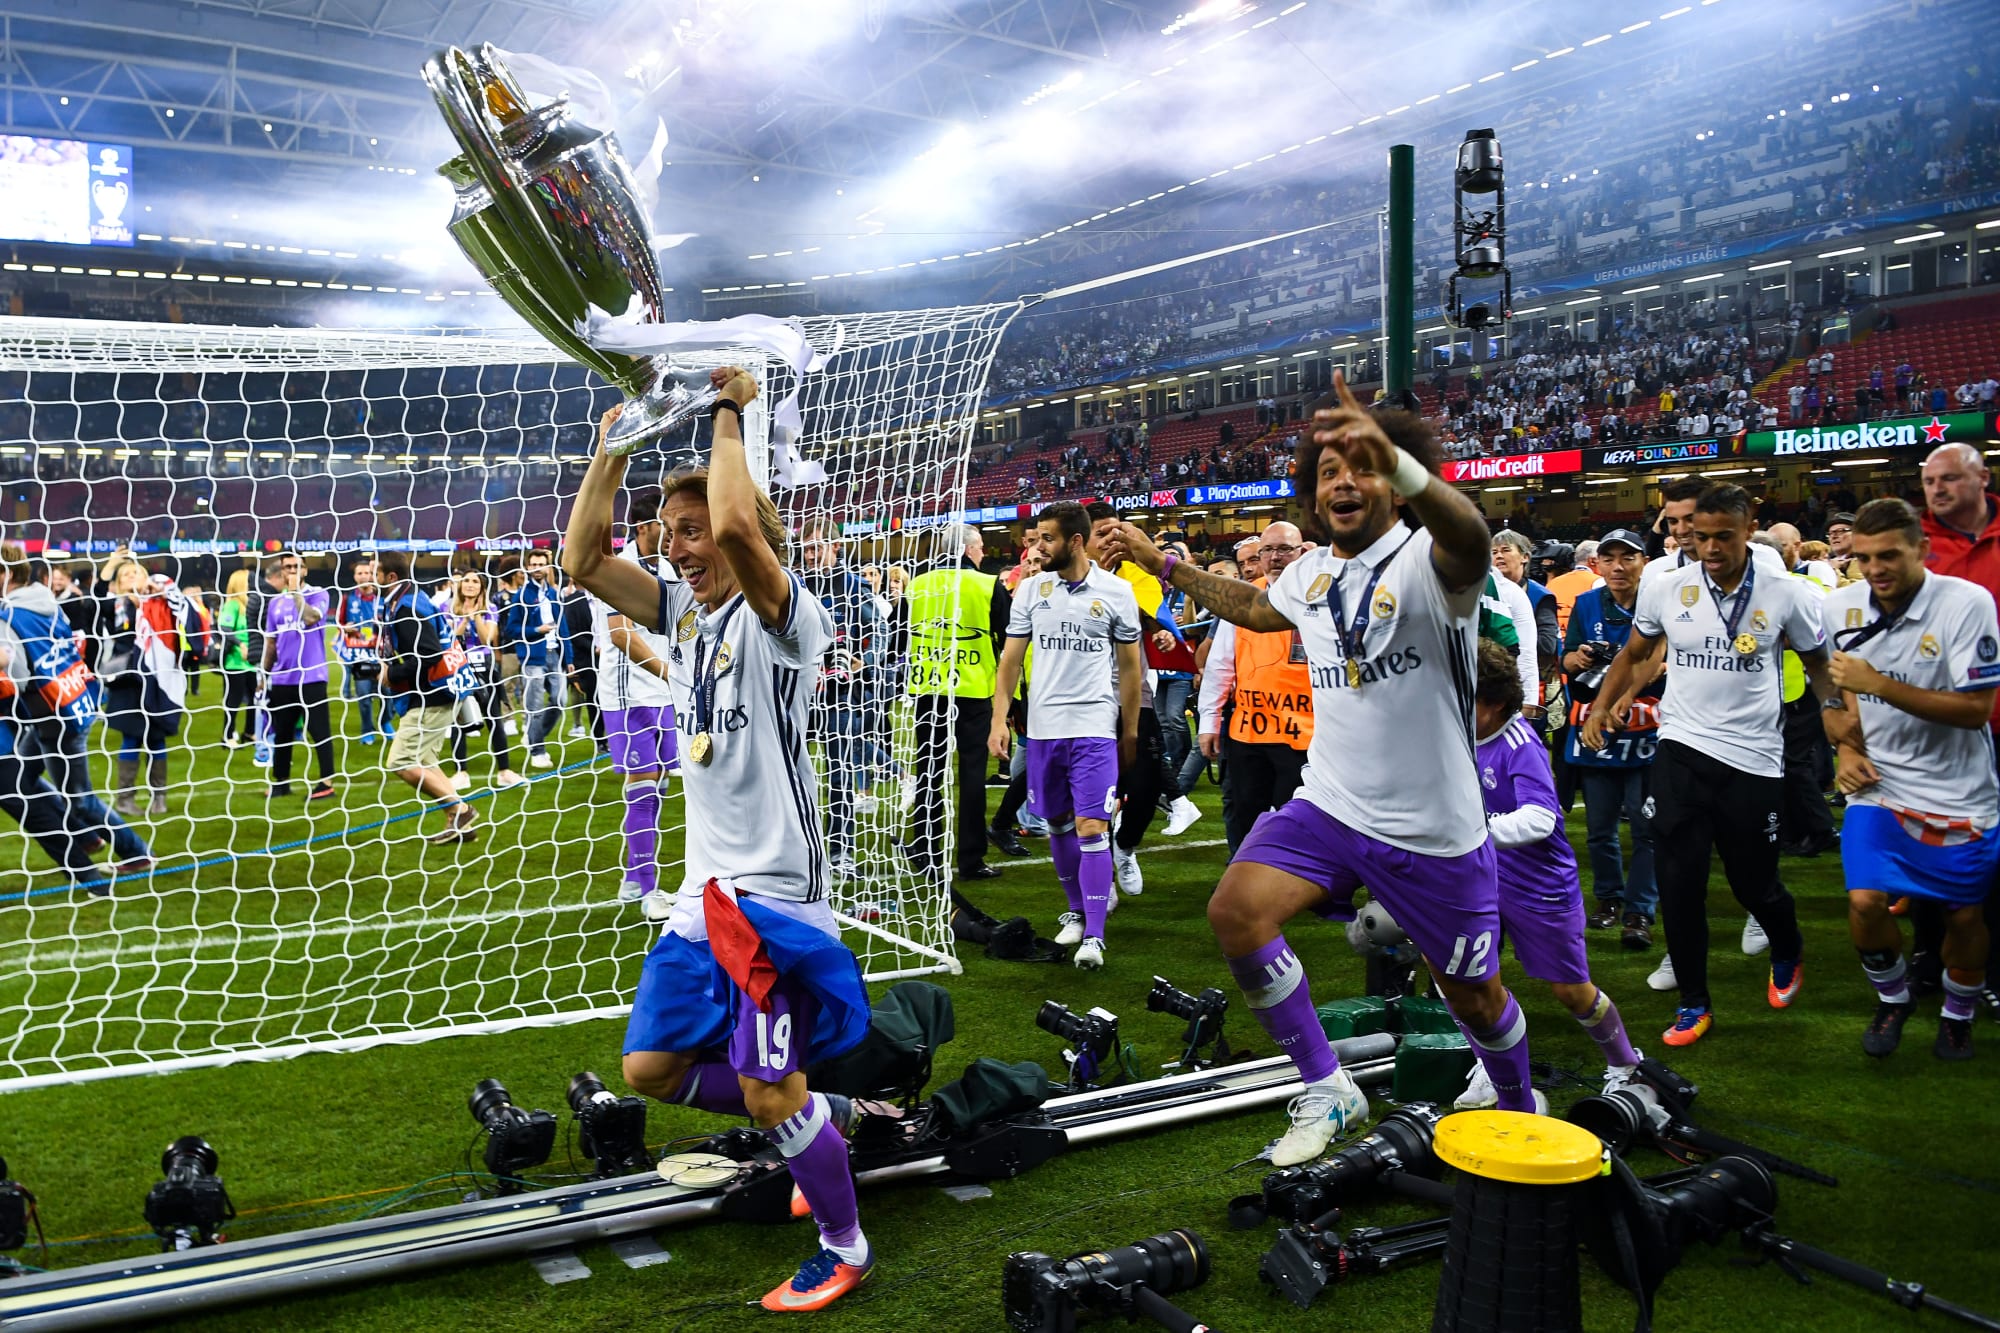 Could Real Madrid really win six trophies this season?